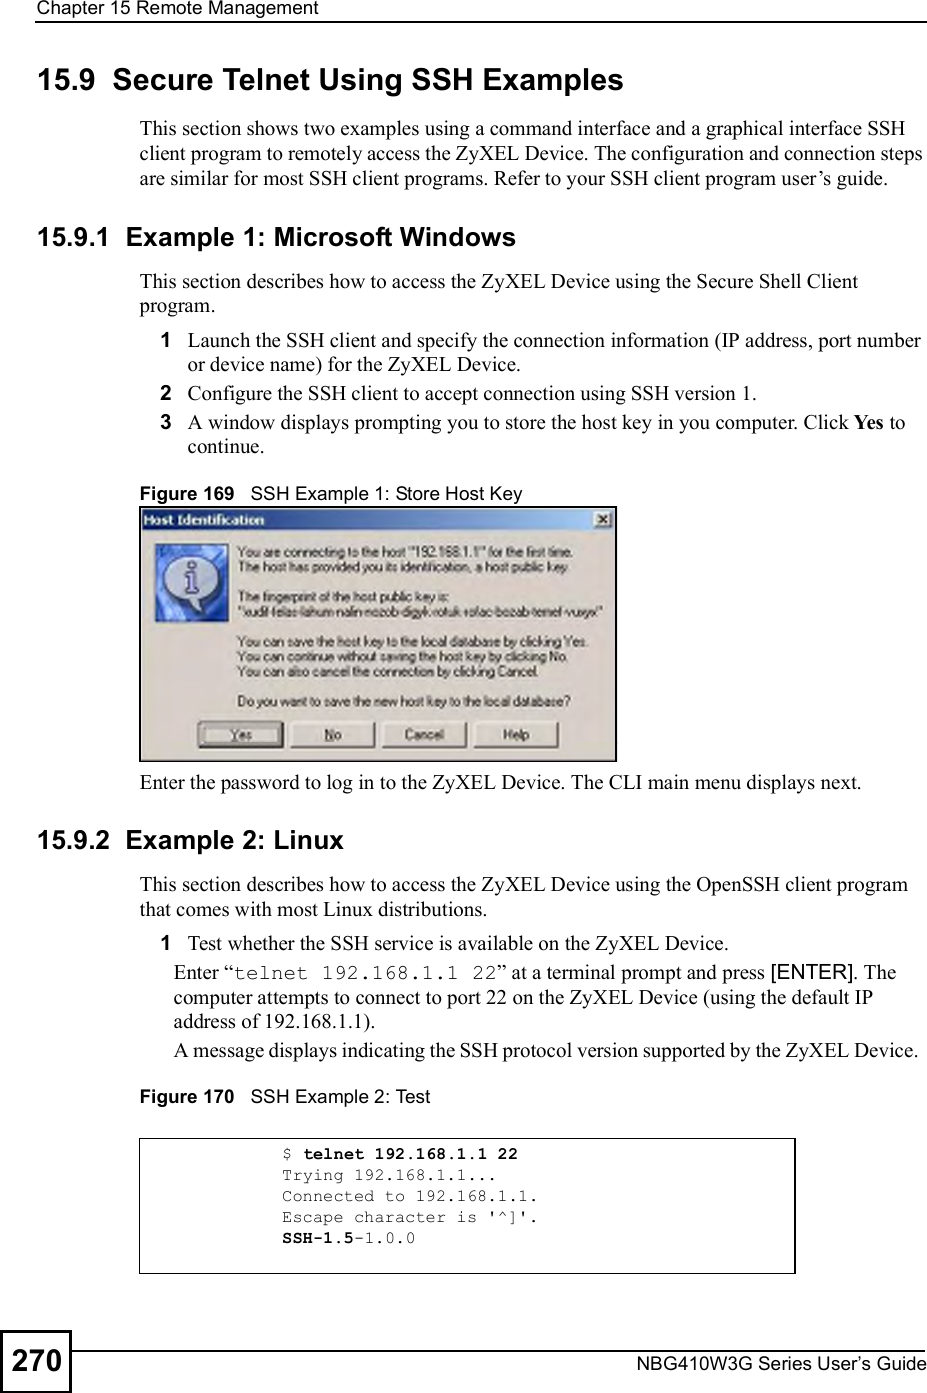 Chapter 15Remote ManagementNBG410W3G Series User s Guide27015.9  Secure Telnet Using SSH ExamplesThis section shows two examples using a command interface and a graphical interface SSH client program to remotely access the ZyXEL Device. The configuration and connection steps are similar for most SSH client programs. Refer to your SSH client program user!s guide. 15.9.1  Example 1: Microsoft Windows This section describes how to access the ZyXEL Device using the Secure Shell Client program.1Launch the SSH client and specify the connection information (IP address, port number or device name) for the ZyXEL Device. 2Configure the SSH client to accept connection using SSH version 1. 3A window displays prompting you to store the host key in you computer. Click Yes to continue. Figure 169   SSH Example 1: Store Host KeyEnter the password to log in to the ZyXEL Device. The CLI main menu displays next. 15.9.2  Example 2: LinuxThis section describes how to access the ZyXEL Device using the OpenSSH client program that comes with most Linux distributions. 1Test whether the SSH service is available on the ZyXEL Device. Enter &quot;telnet 192.168.1.1 22# at a terminal prompt and press [ENTER]. The computer attempts to connect to port 22 on the ZyXEL Device (using the default IP address of 192.168.1.1). A message displays indicating the SSH protocol version supported by the ZyXEL Device.  Figure 170   SSH Example 2: Test $ telnet 192.168.1.1 22Trying 192.168.1.1...Connected to 192.168.1.1.Escape character is &apos;^]&apos;.SSH-1.5-1.0.0